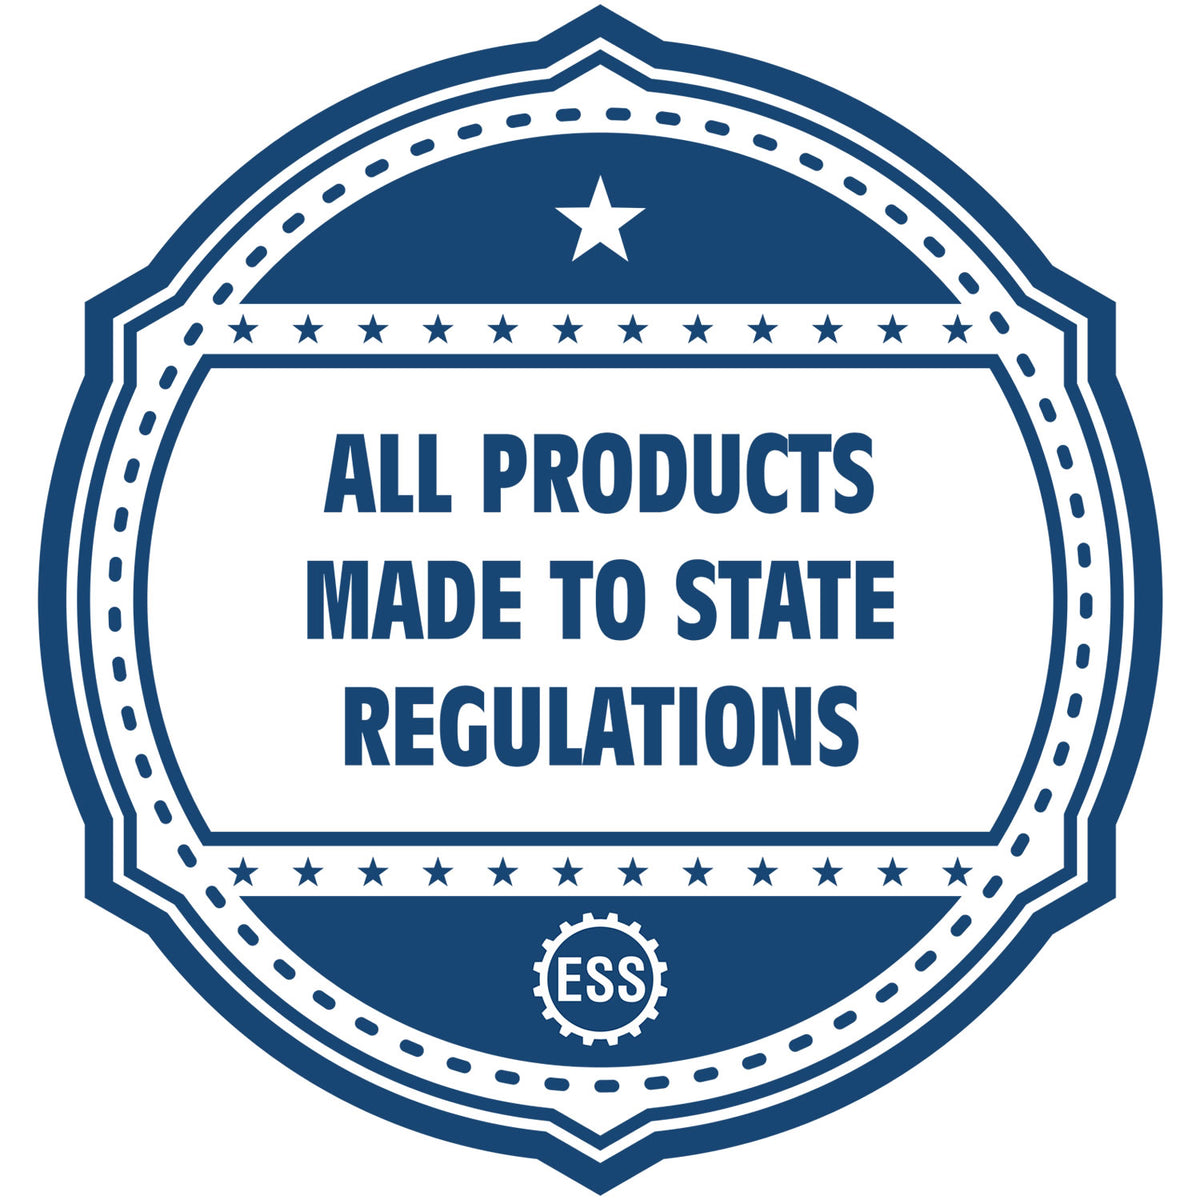 An icon or badge element for the Digital Massachusetts Landscape Architect Stamp showing that this product is made in compliance with state regulations.